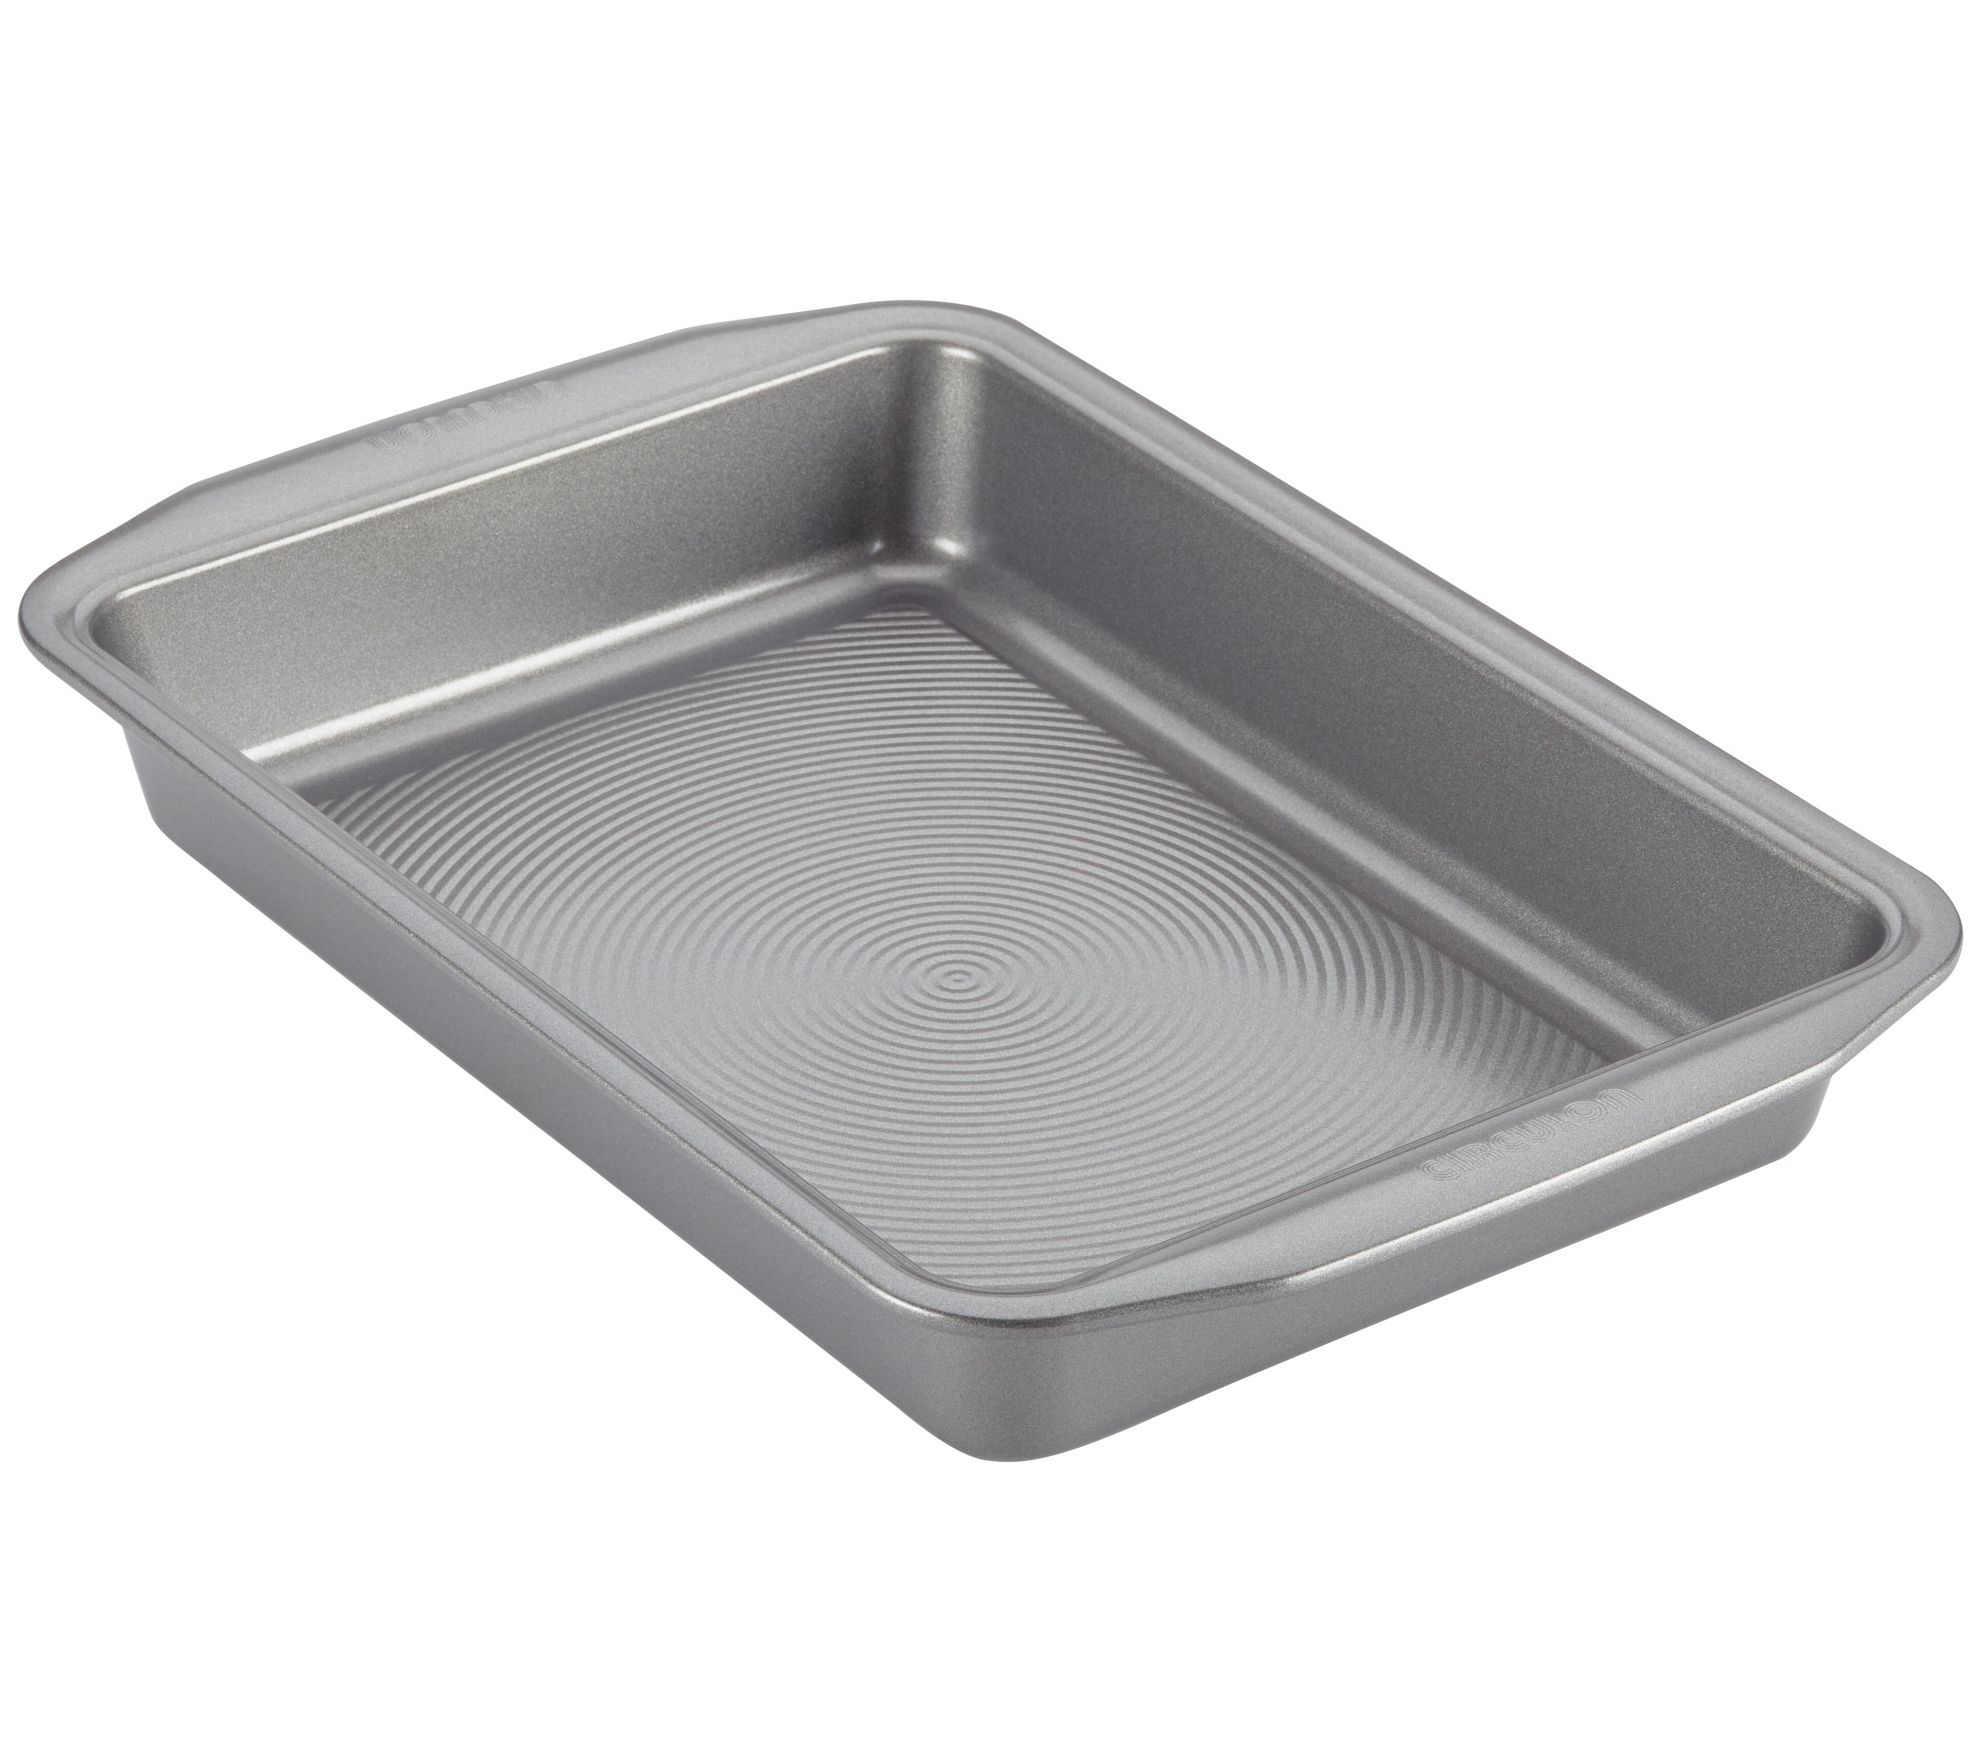 BergHOFF Gem Non-Stick Covered Cake Pan with Slicer